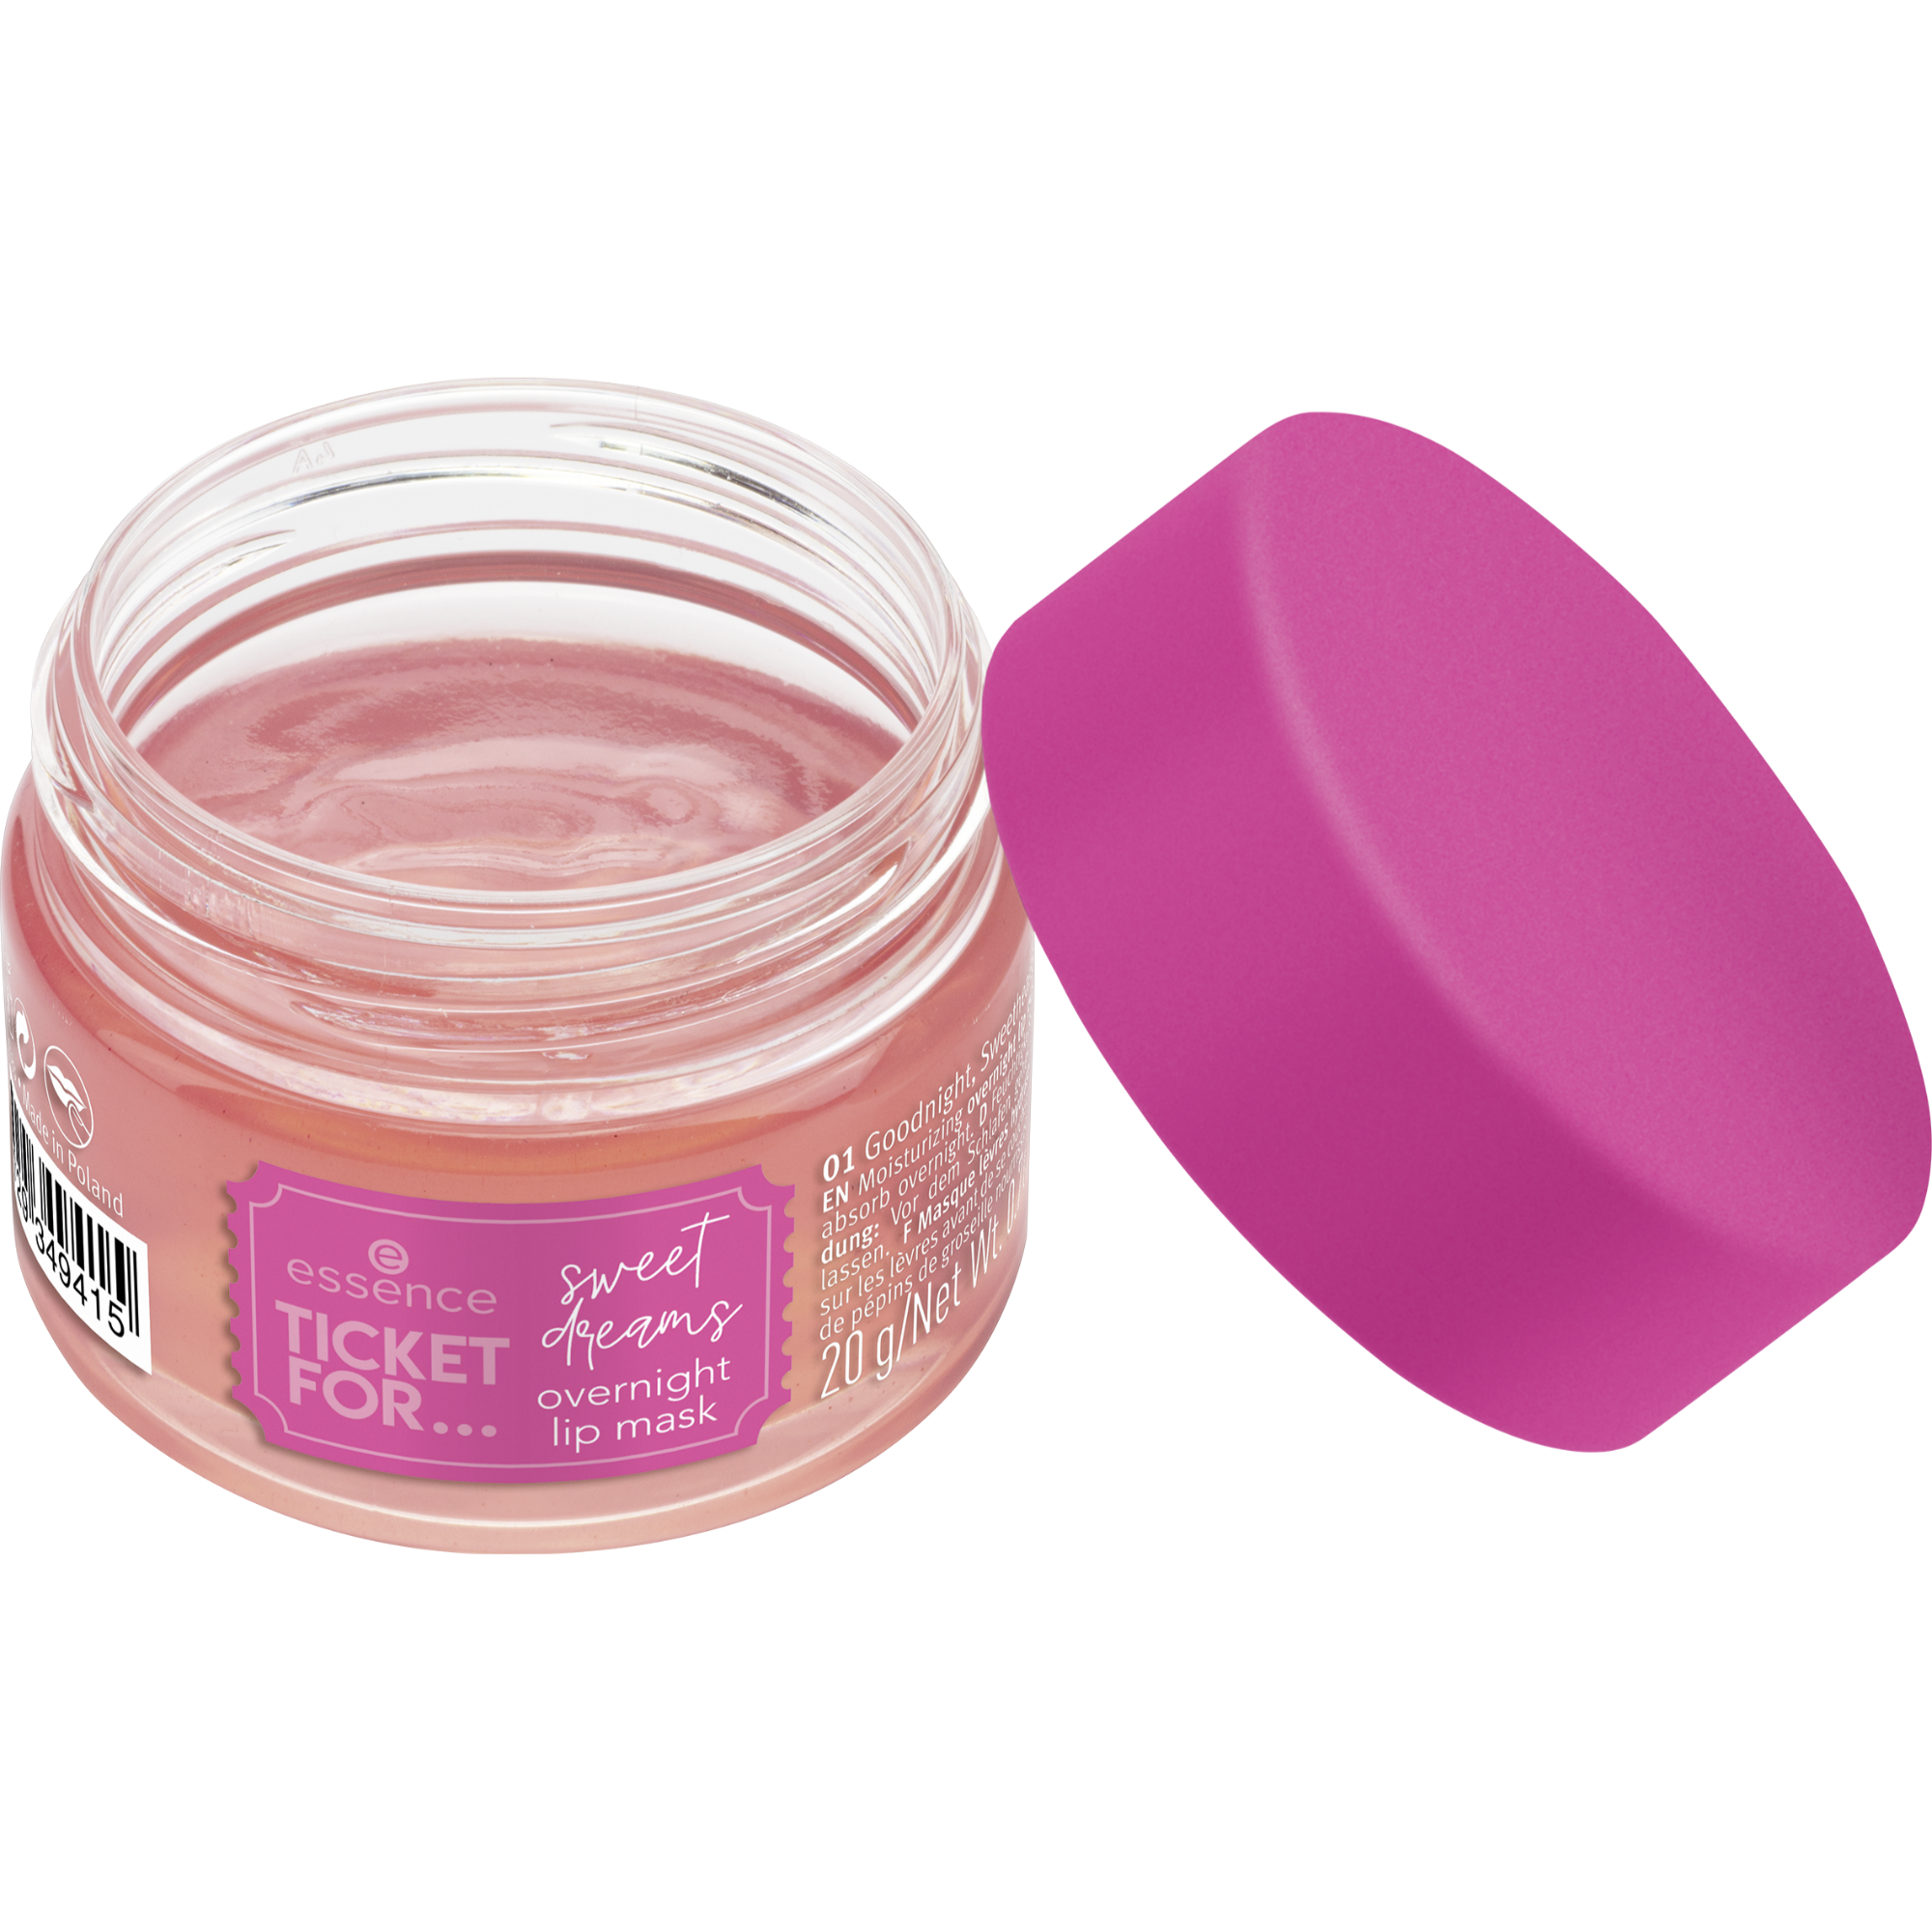 TICKET FOR... sweet dreams overnight lip mask